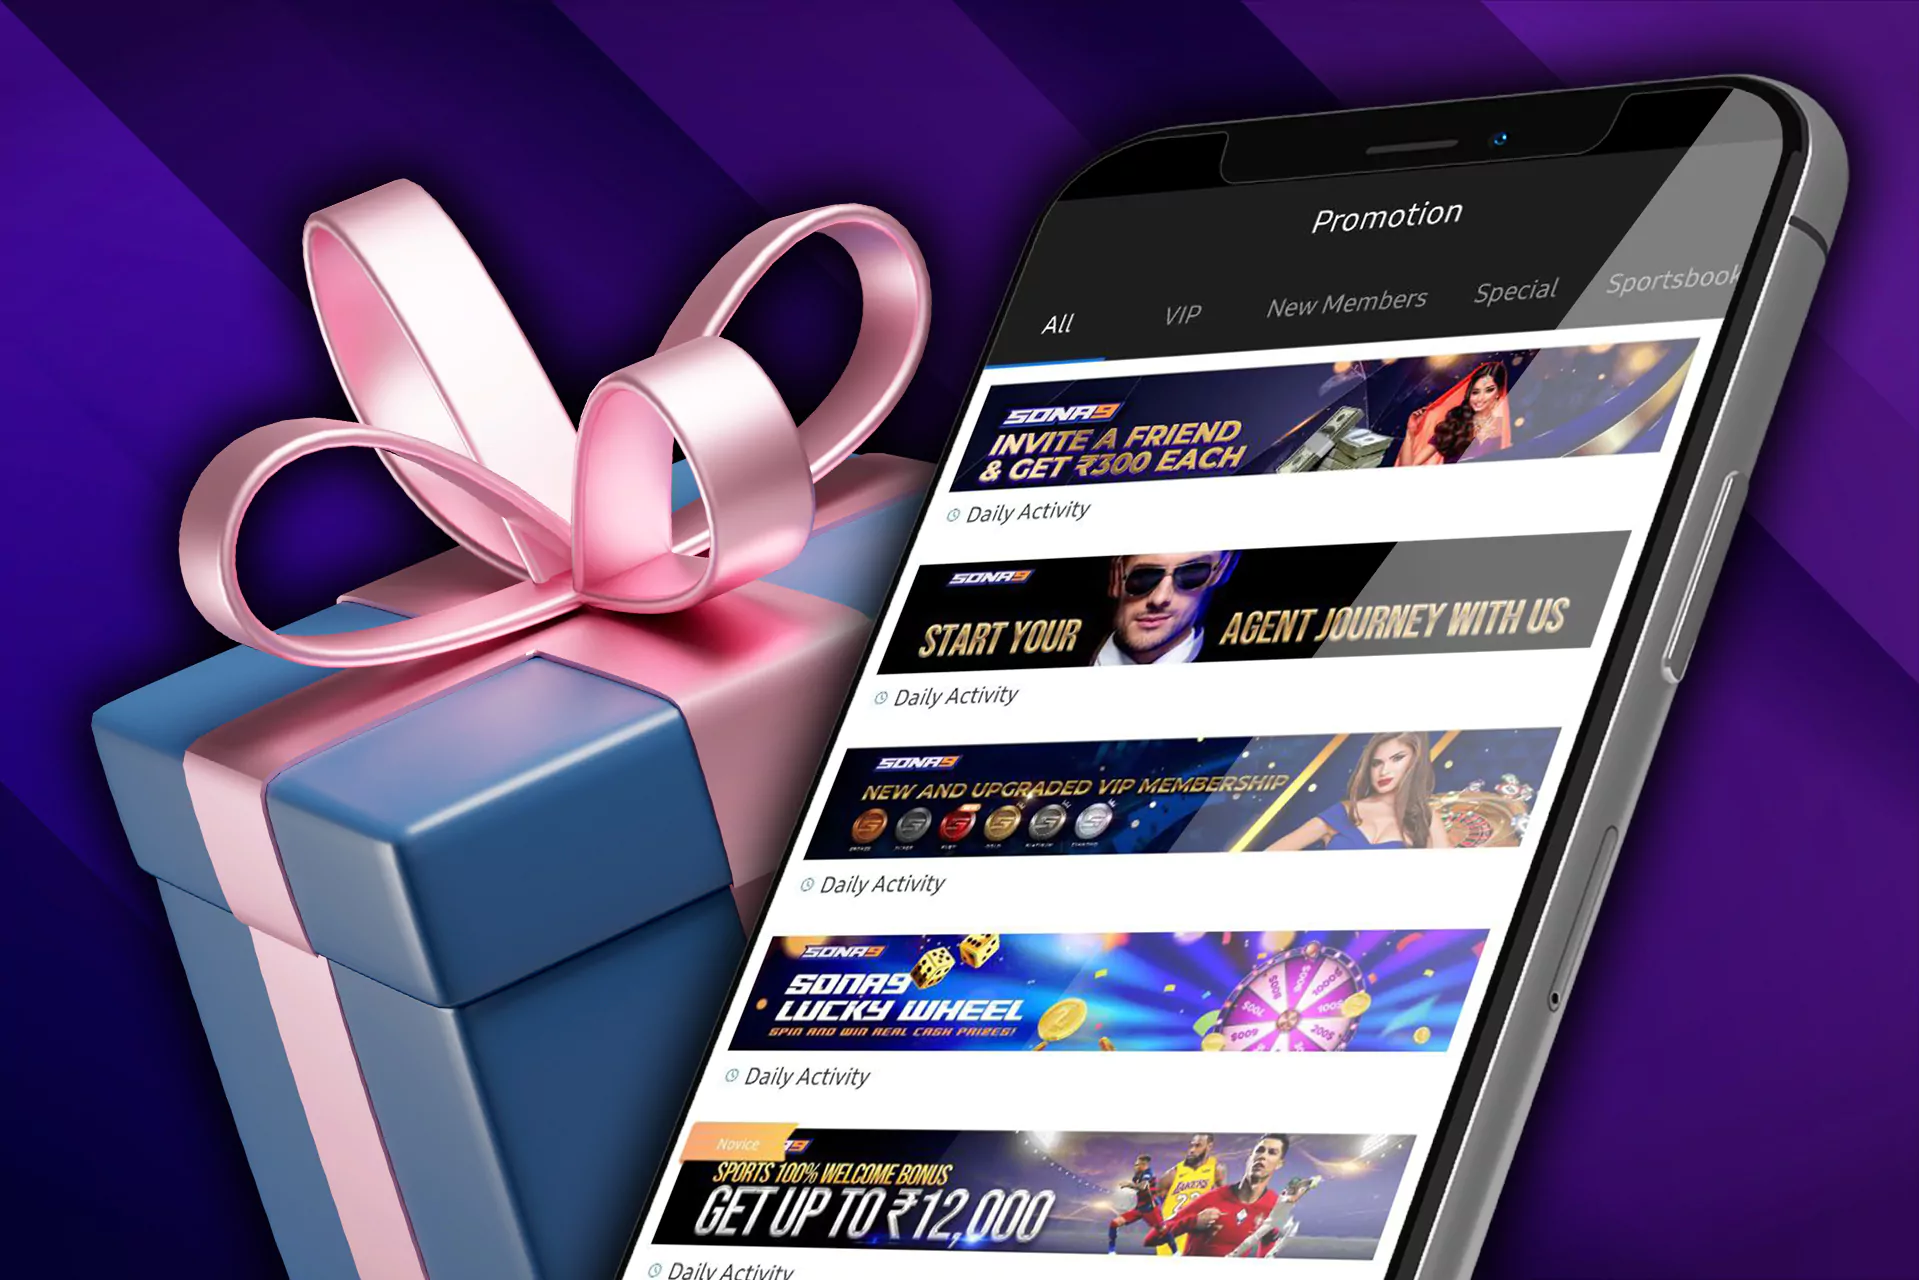 You can find many bonuses and promotions in the Sona9 app.